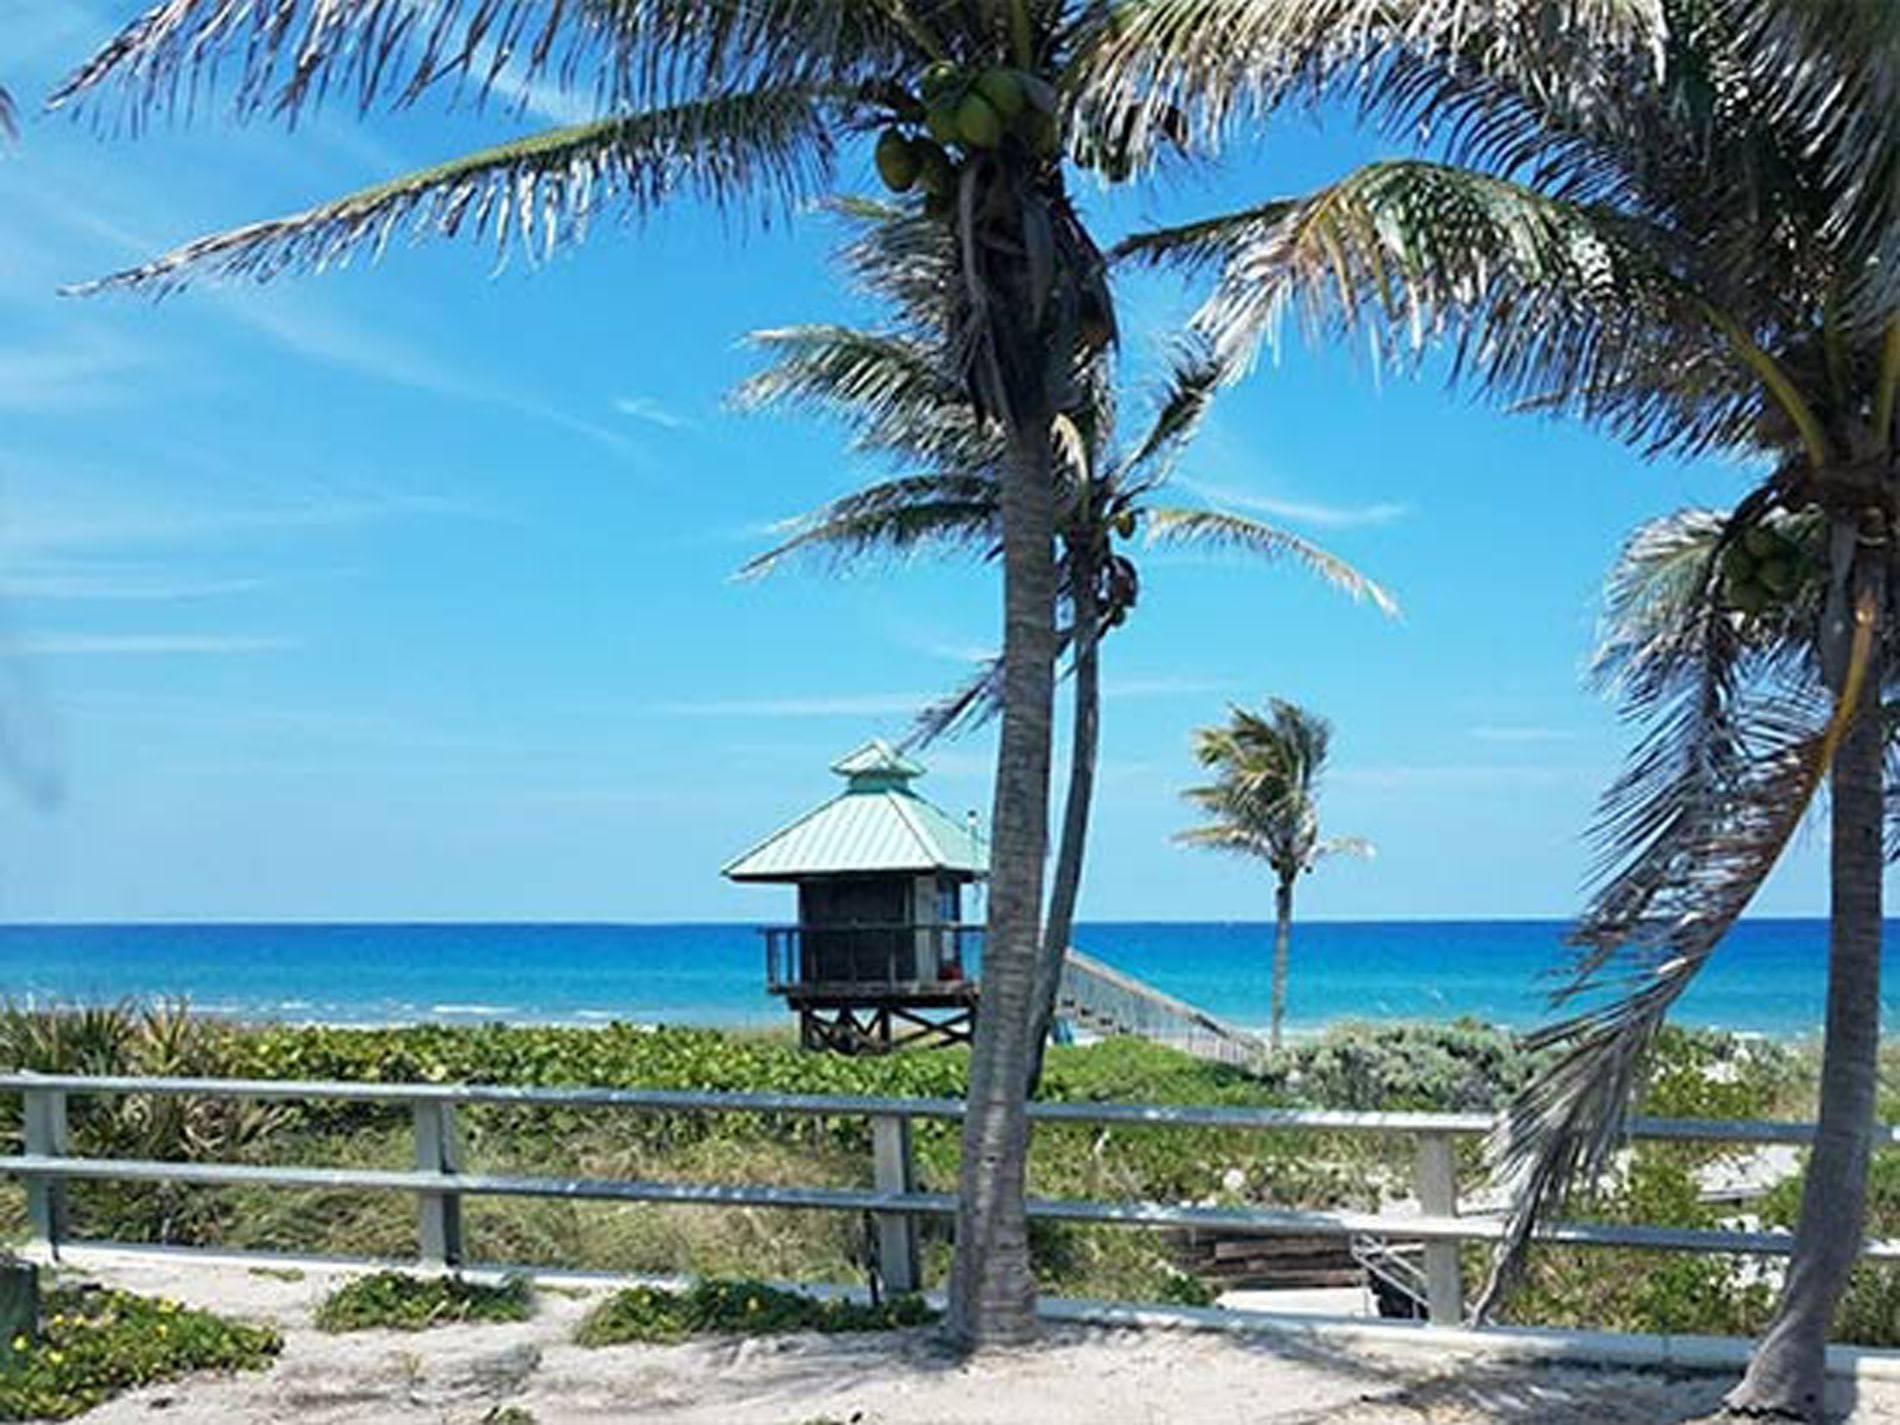 Ocean view from a sandy beach on a sunny day in Spanish River Park near Ocean Lodge Boca Raton 